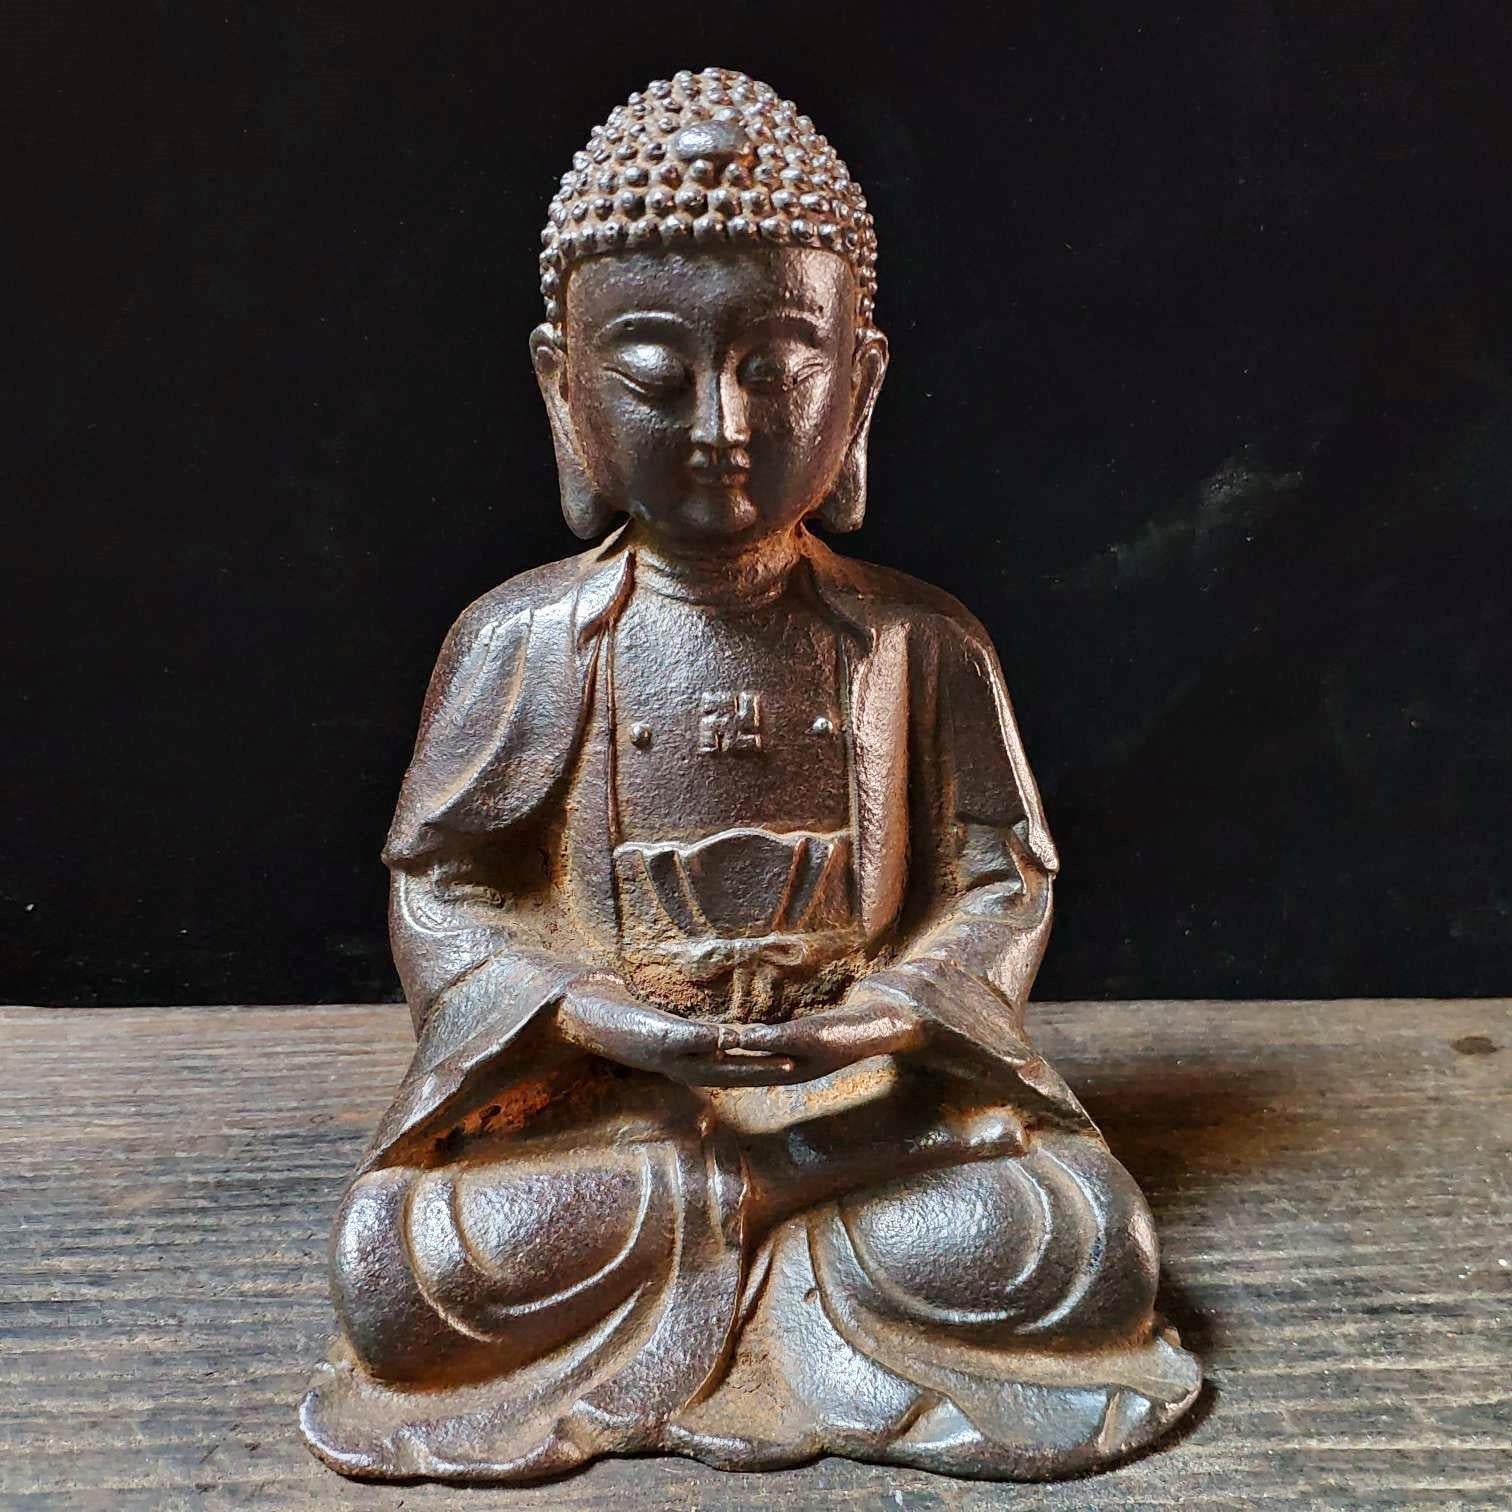 This is a beautiful Chinese Vintage Rare Iron Zazen Buddha Statue.

Zazen is a form of seated meditation practiced in the Zen Buddhist tradition. It involves sitting in a specific posture with a focused mind, often accompanied by controlled